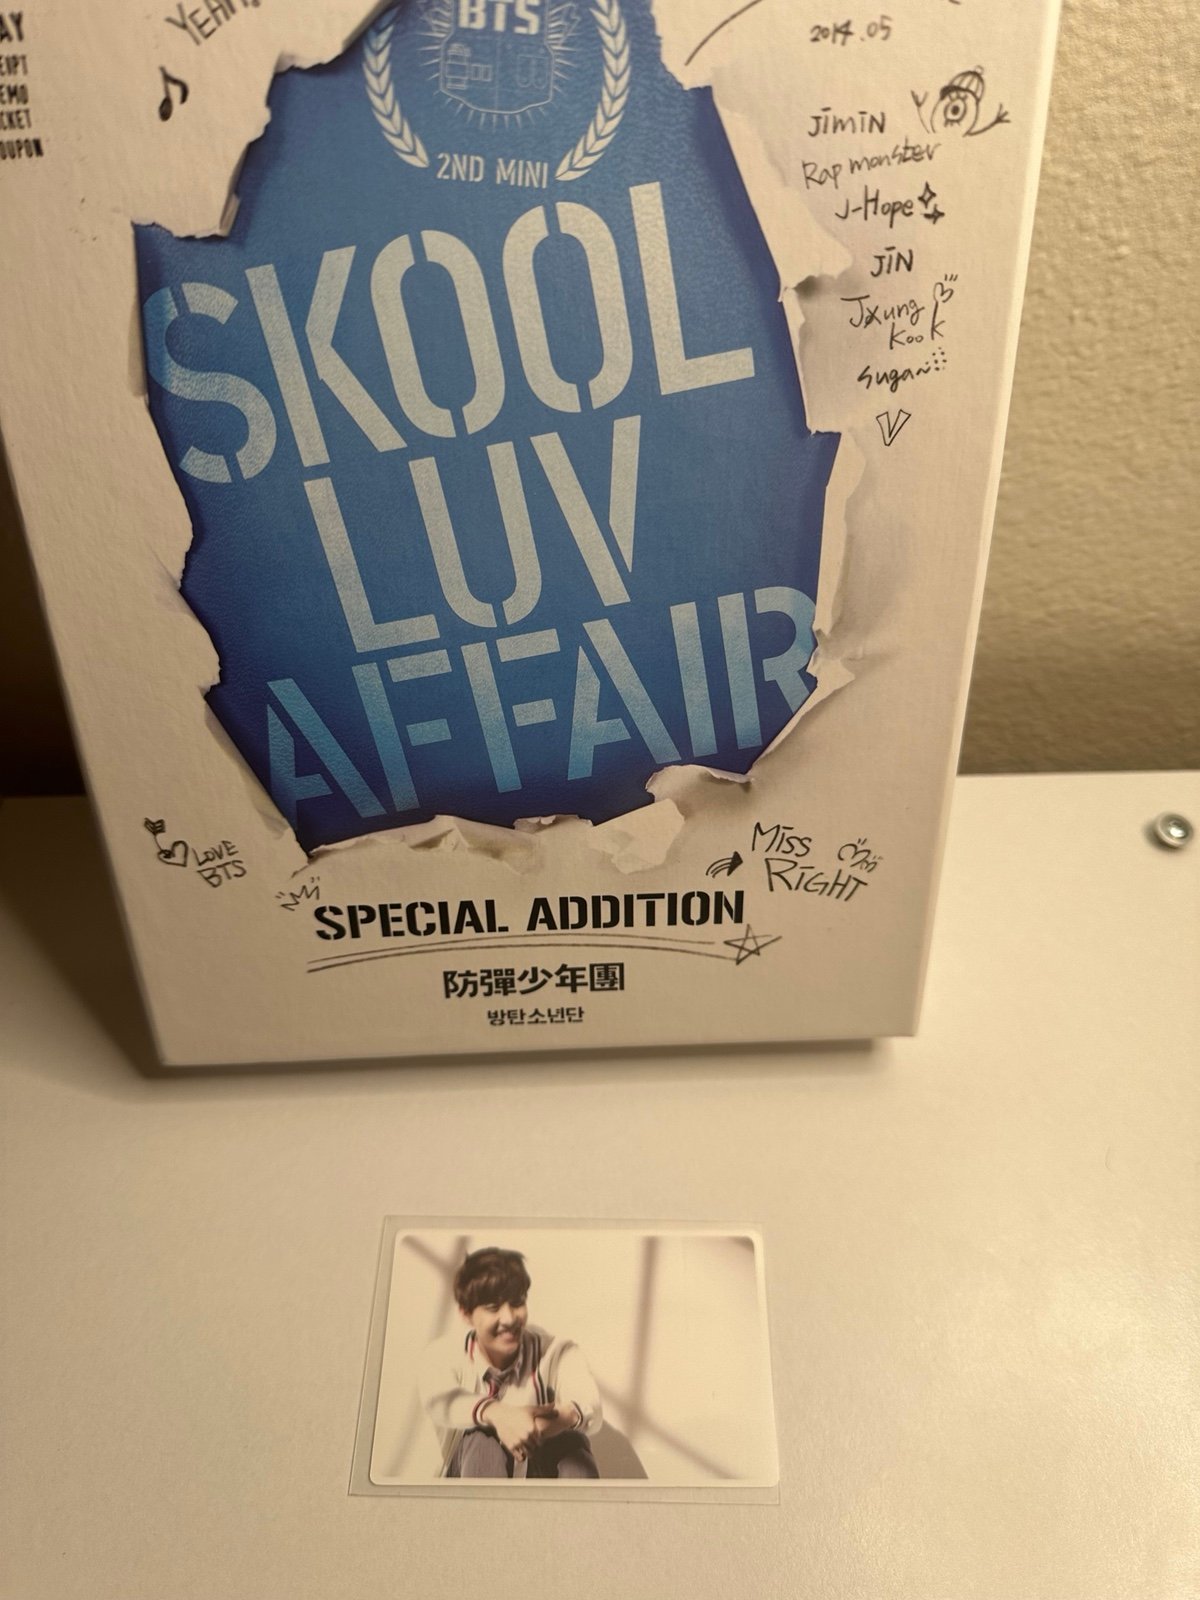 BTS skool luv affair Special Edition with J-Hope Official PC qq78mAAtU